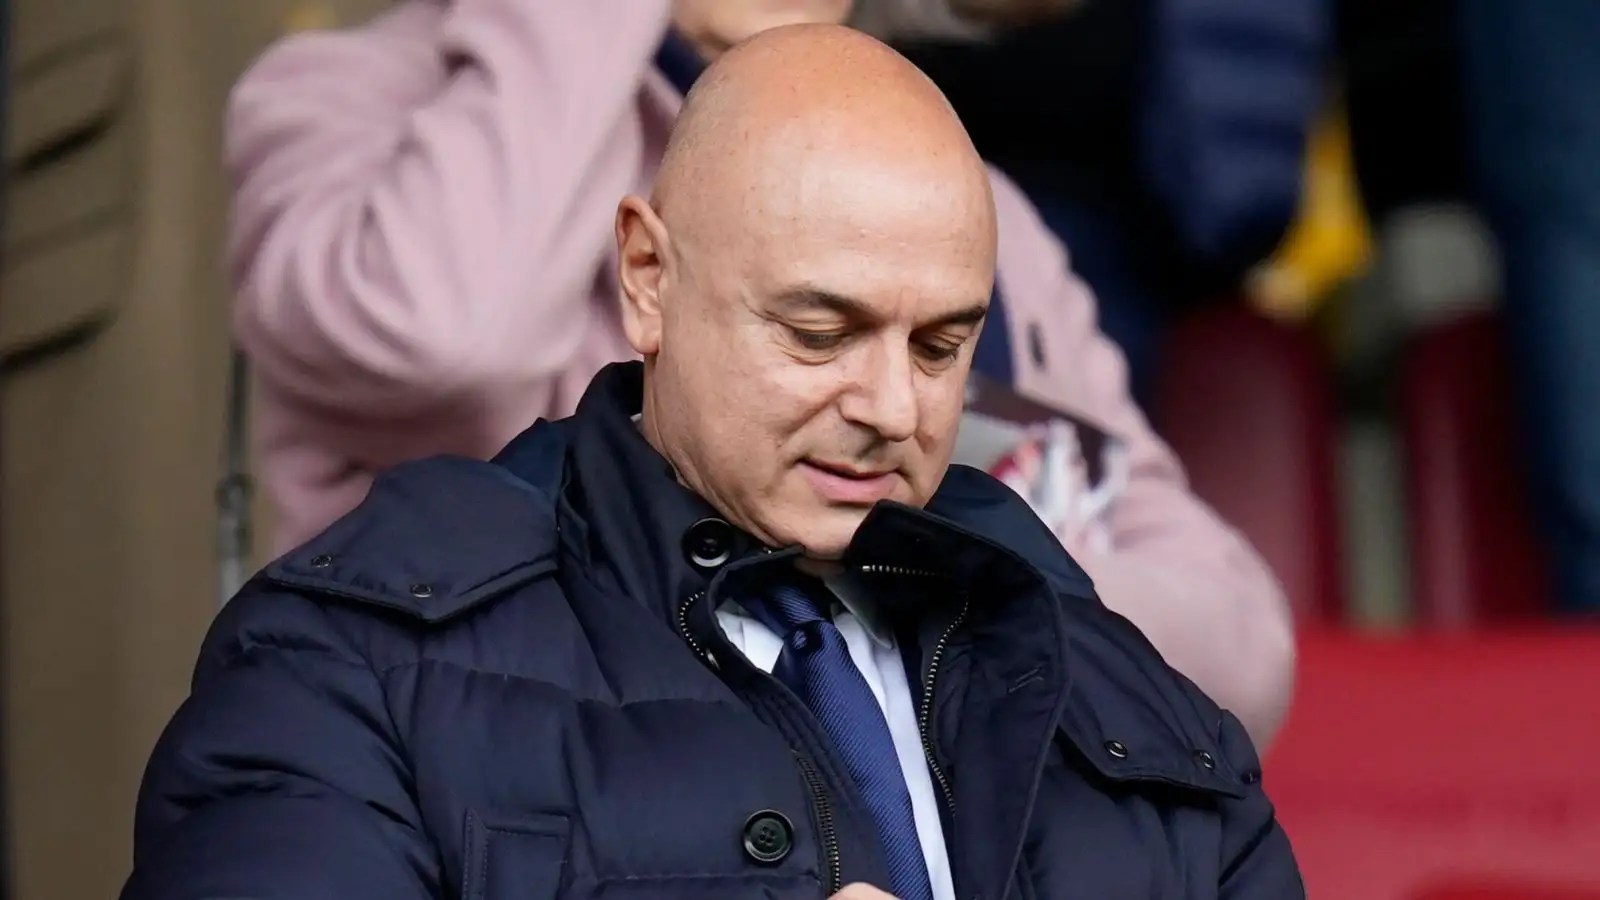 Tottenham takeover: Levy tipped to listen to ‘all sorts of offers’ up to ‘huge asking price’